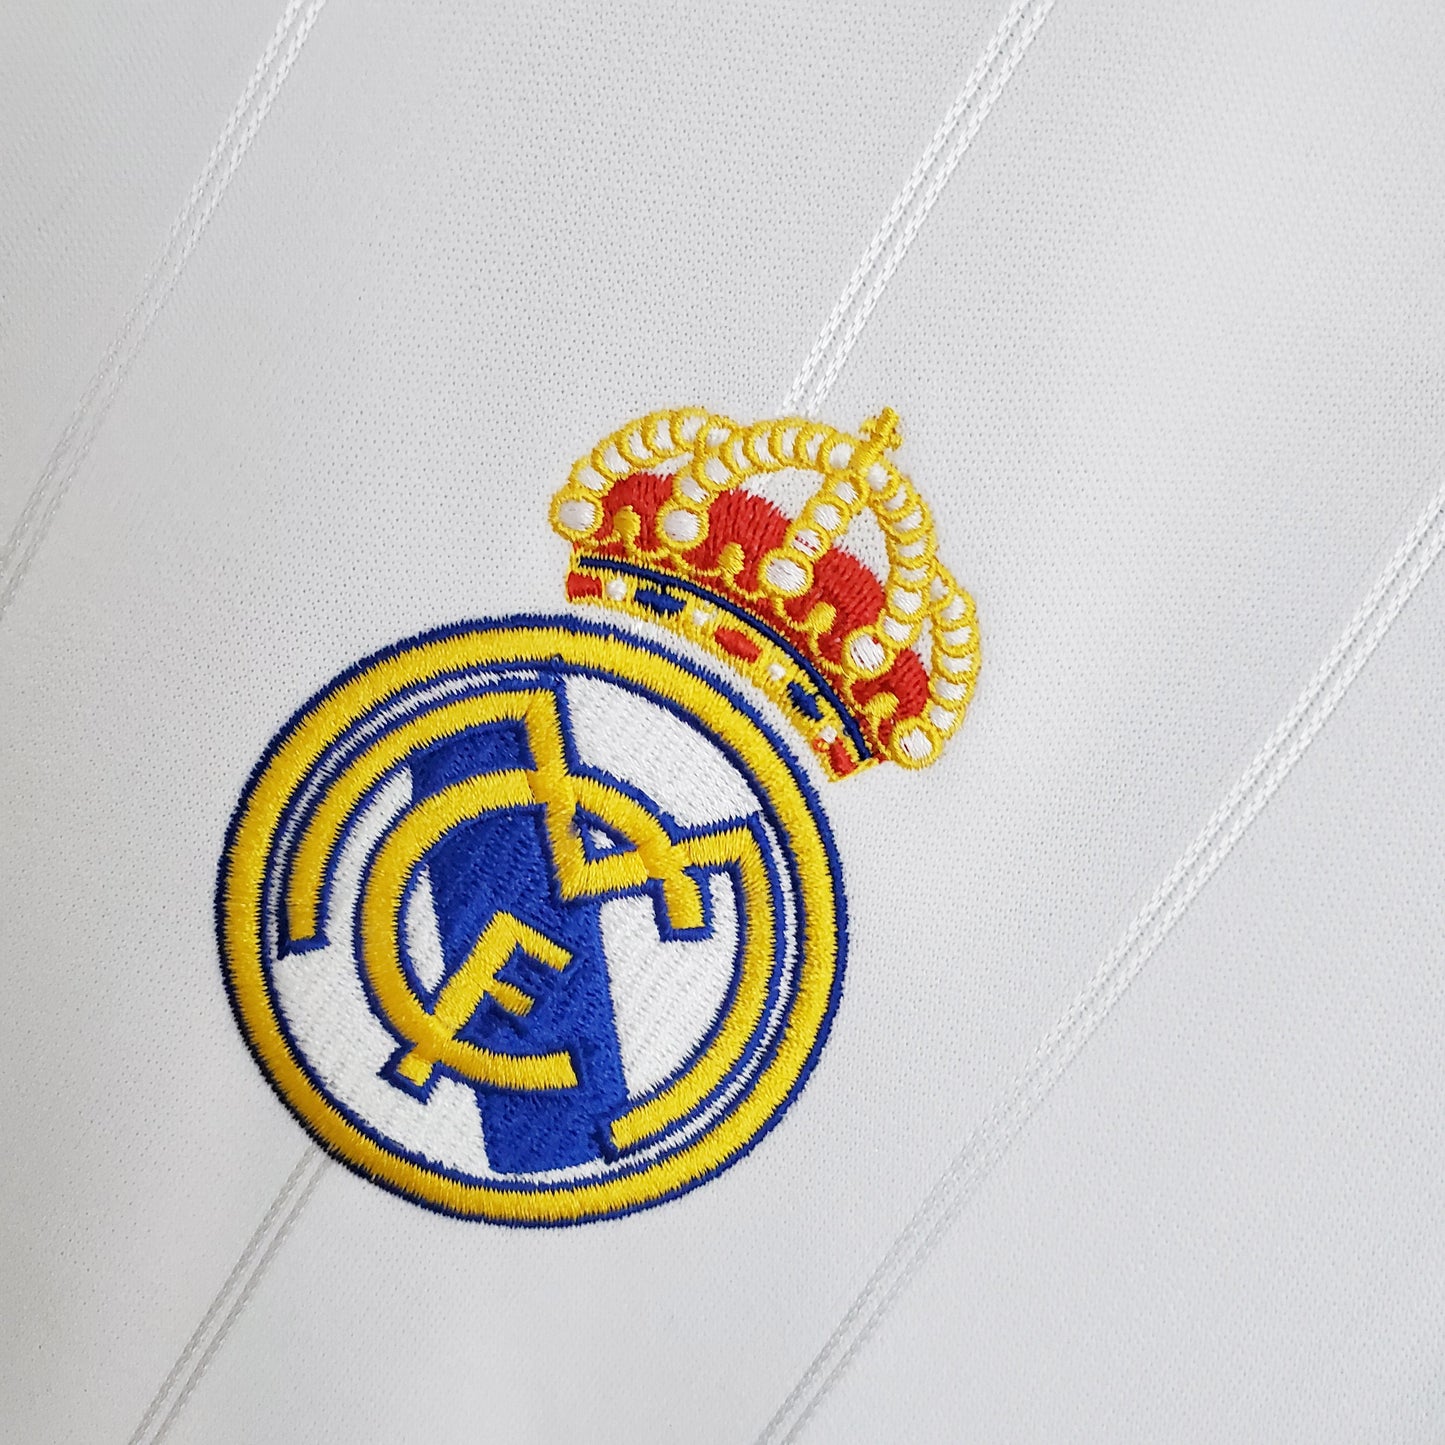 REAL MADRID 2012 - 2013 HOME JERSEY